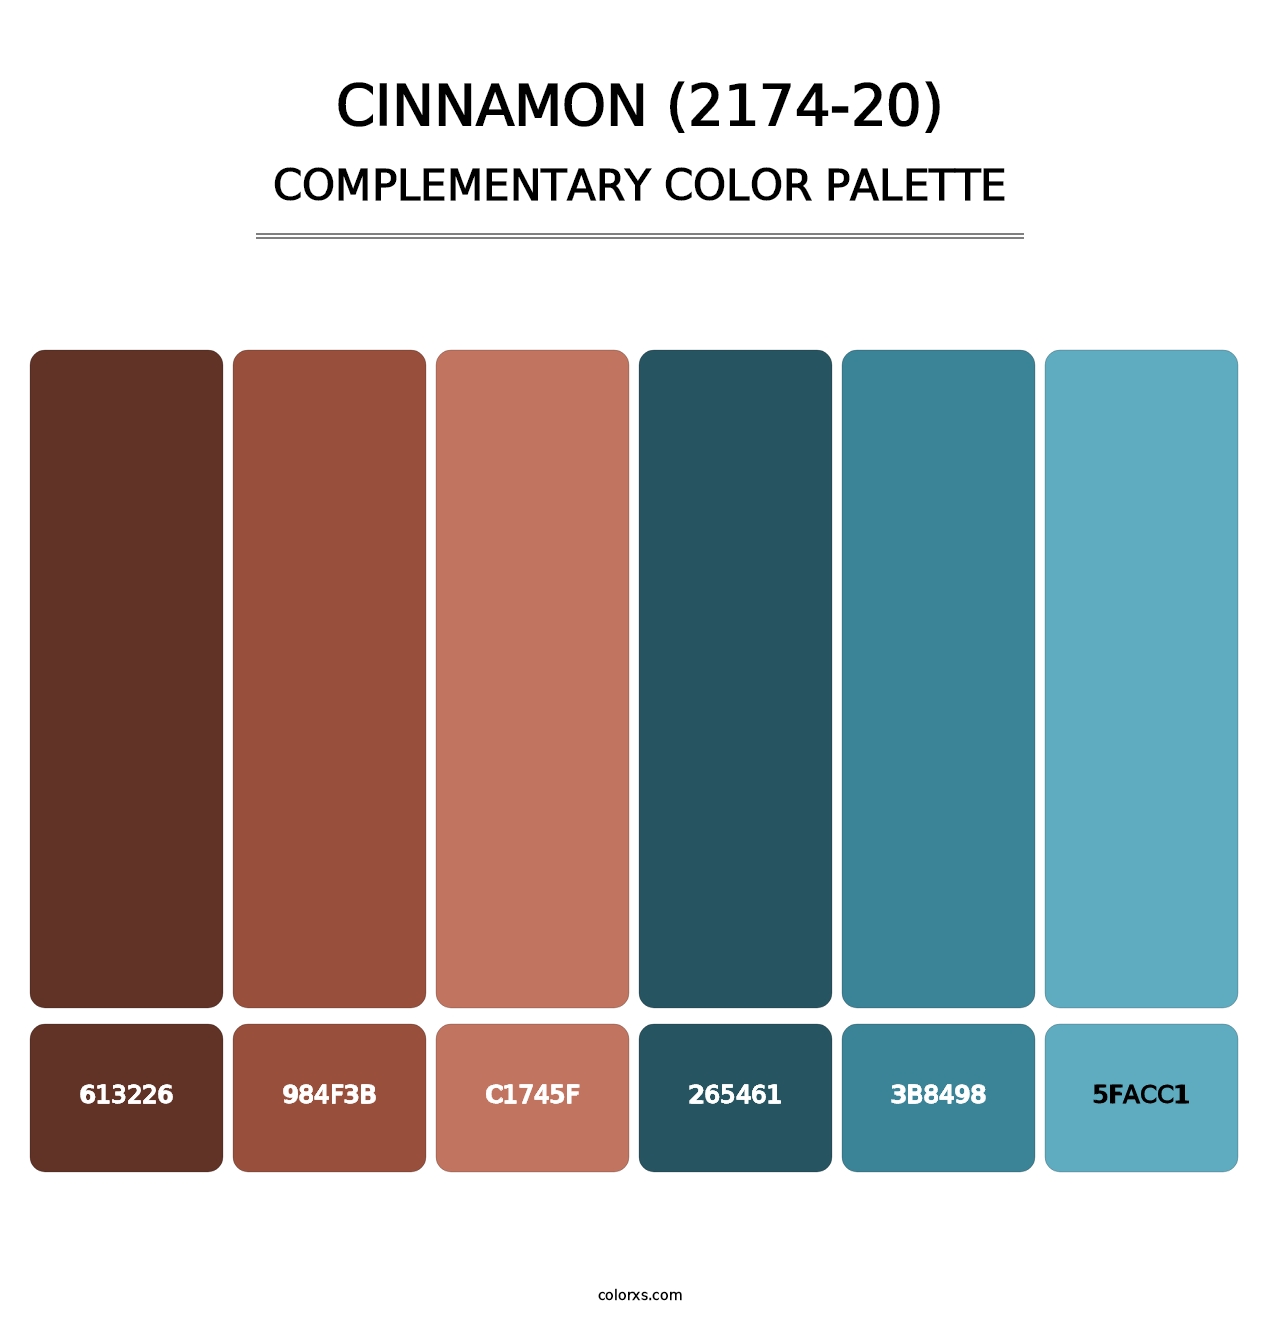 Cinnamon (2174-20) - Complementary Color Palette